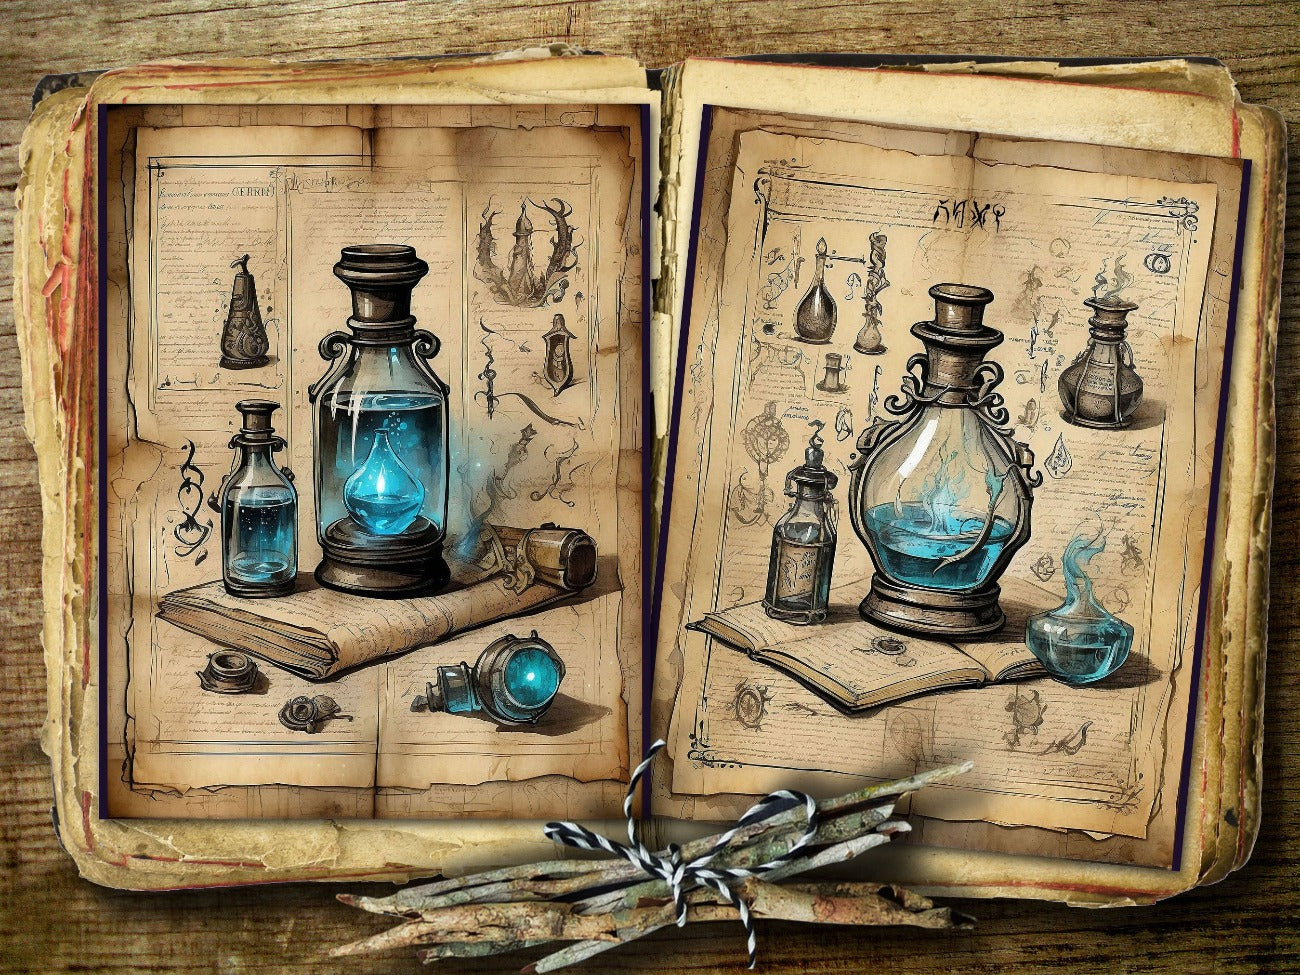 SPELLBOUND POTIONS, Junk Journal Pages, Apothecary Bottles, Fantasy Occult Magic Spellbook Kit, Witchy MagicGrimoire, Spellbook Printable - Morgana Magick Spell